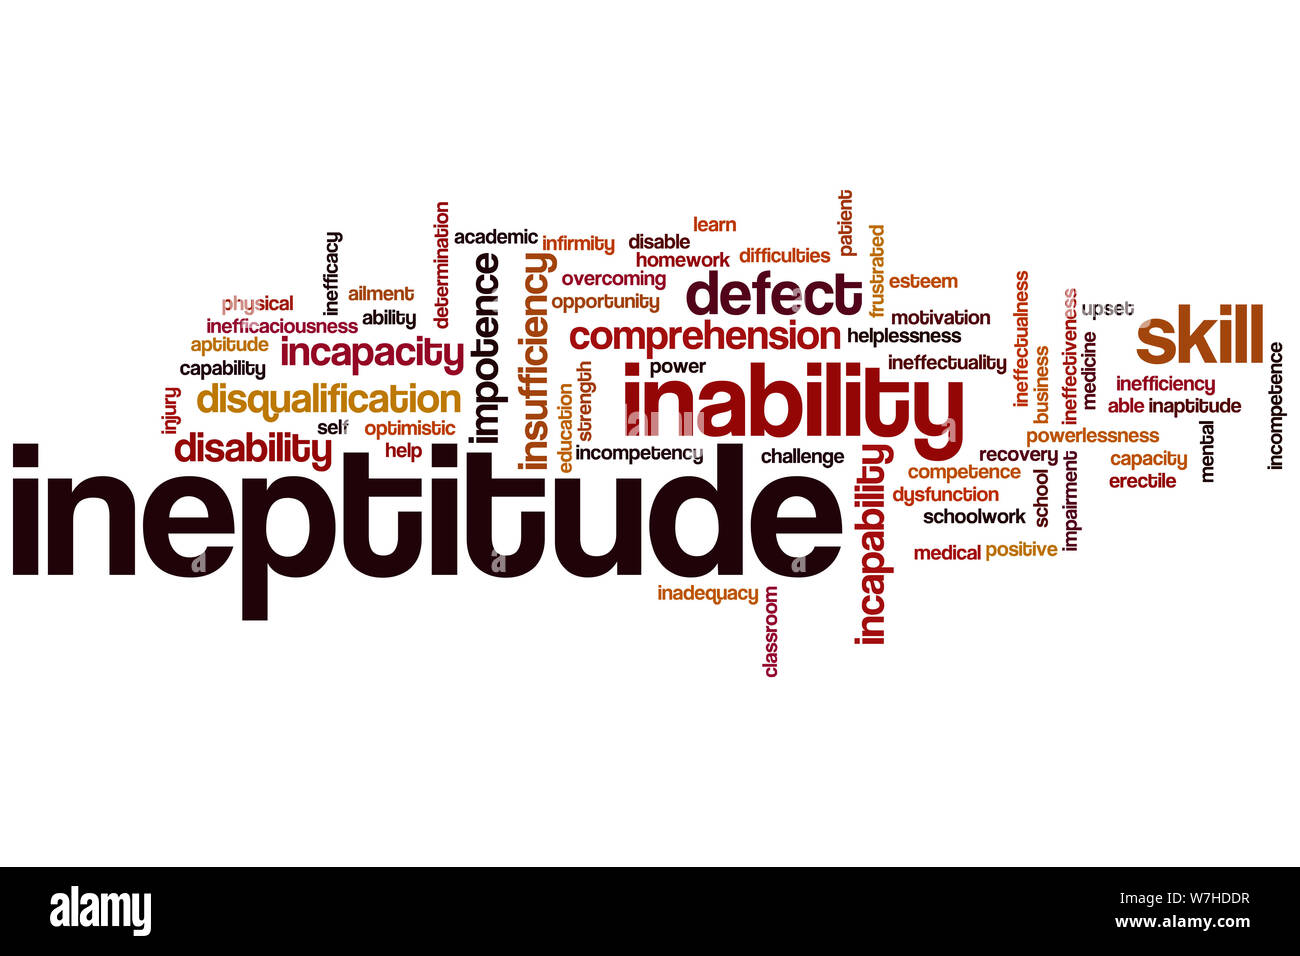 Ineptitude word cloud concept Stock Photo